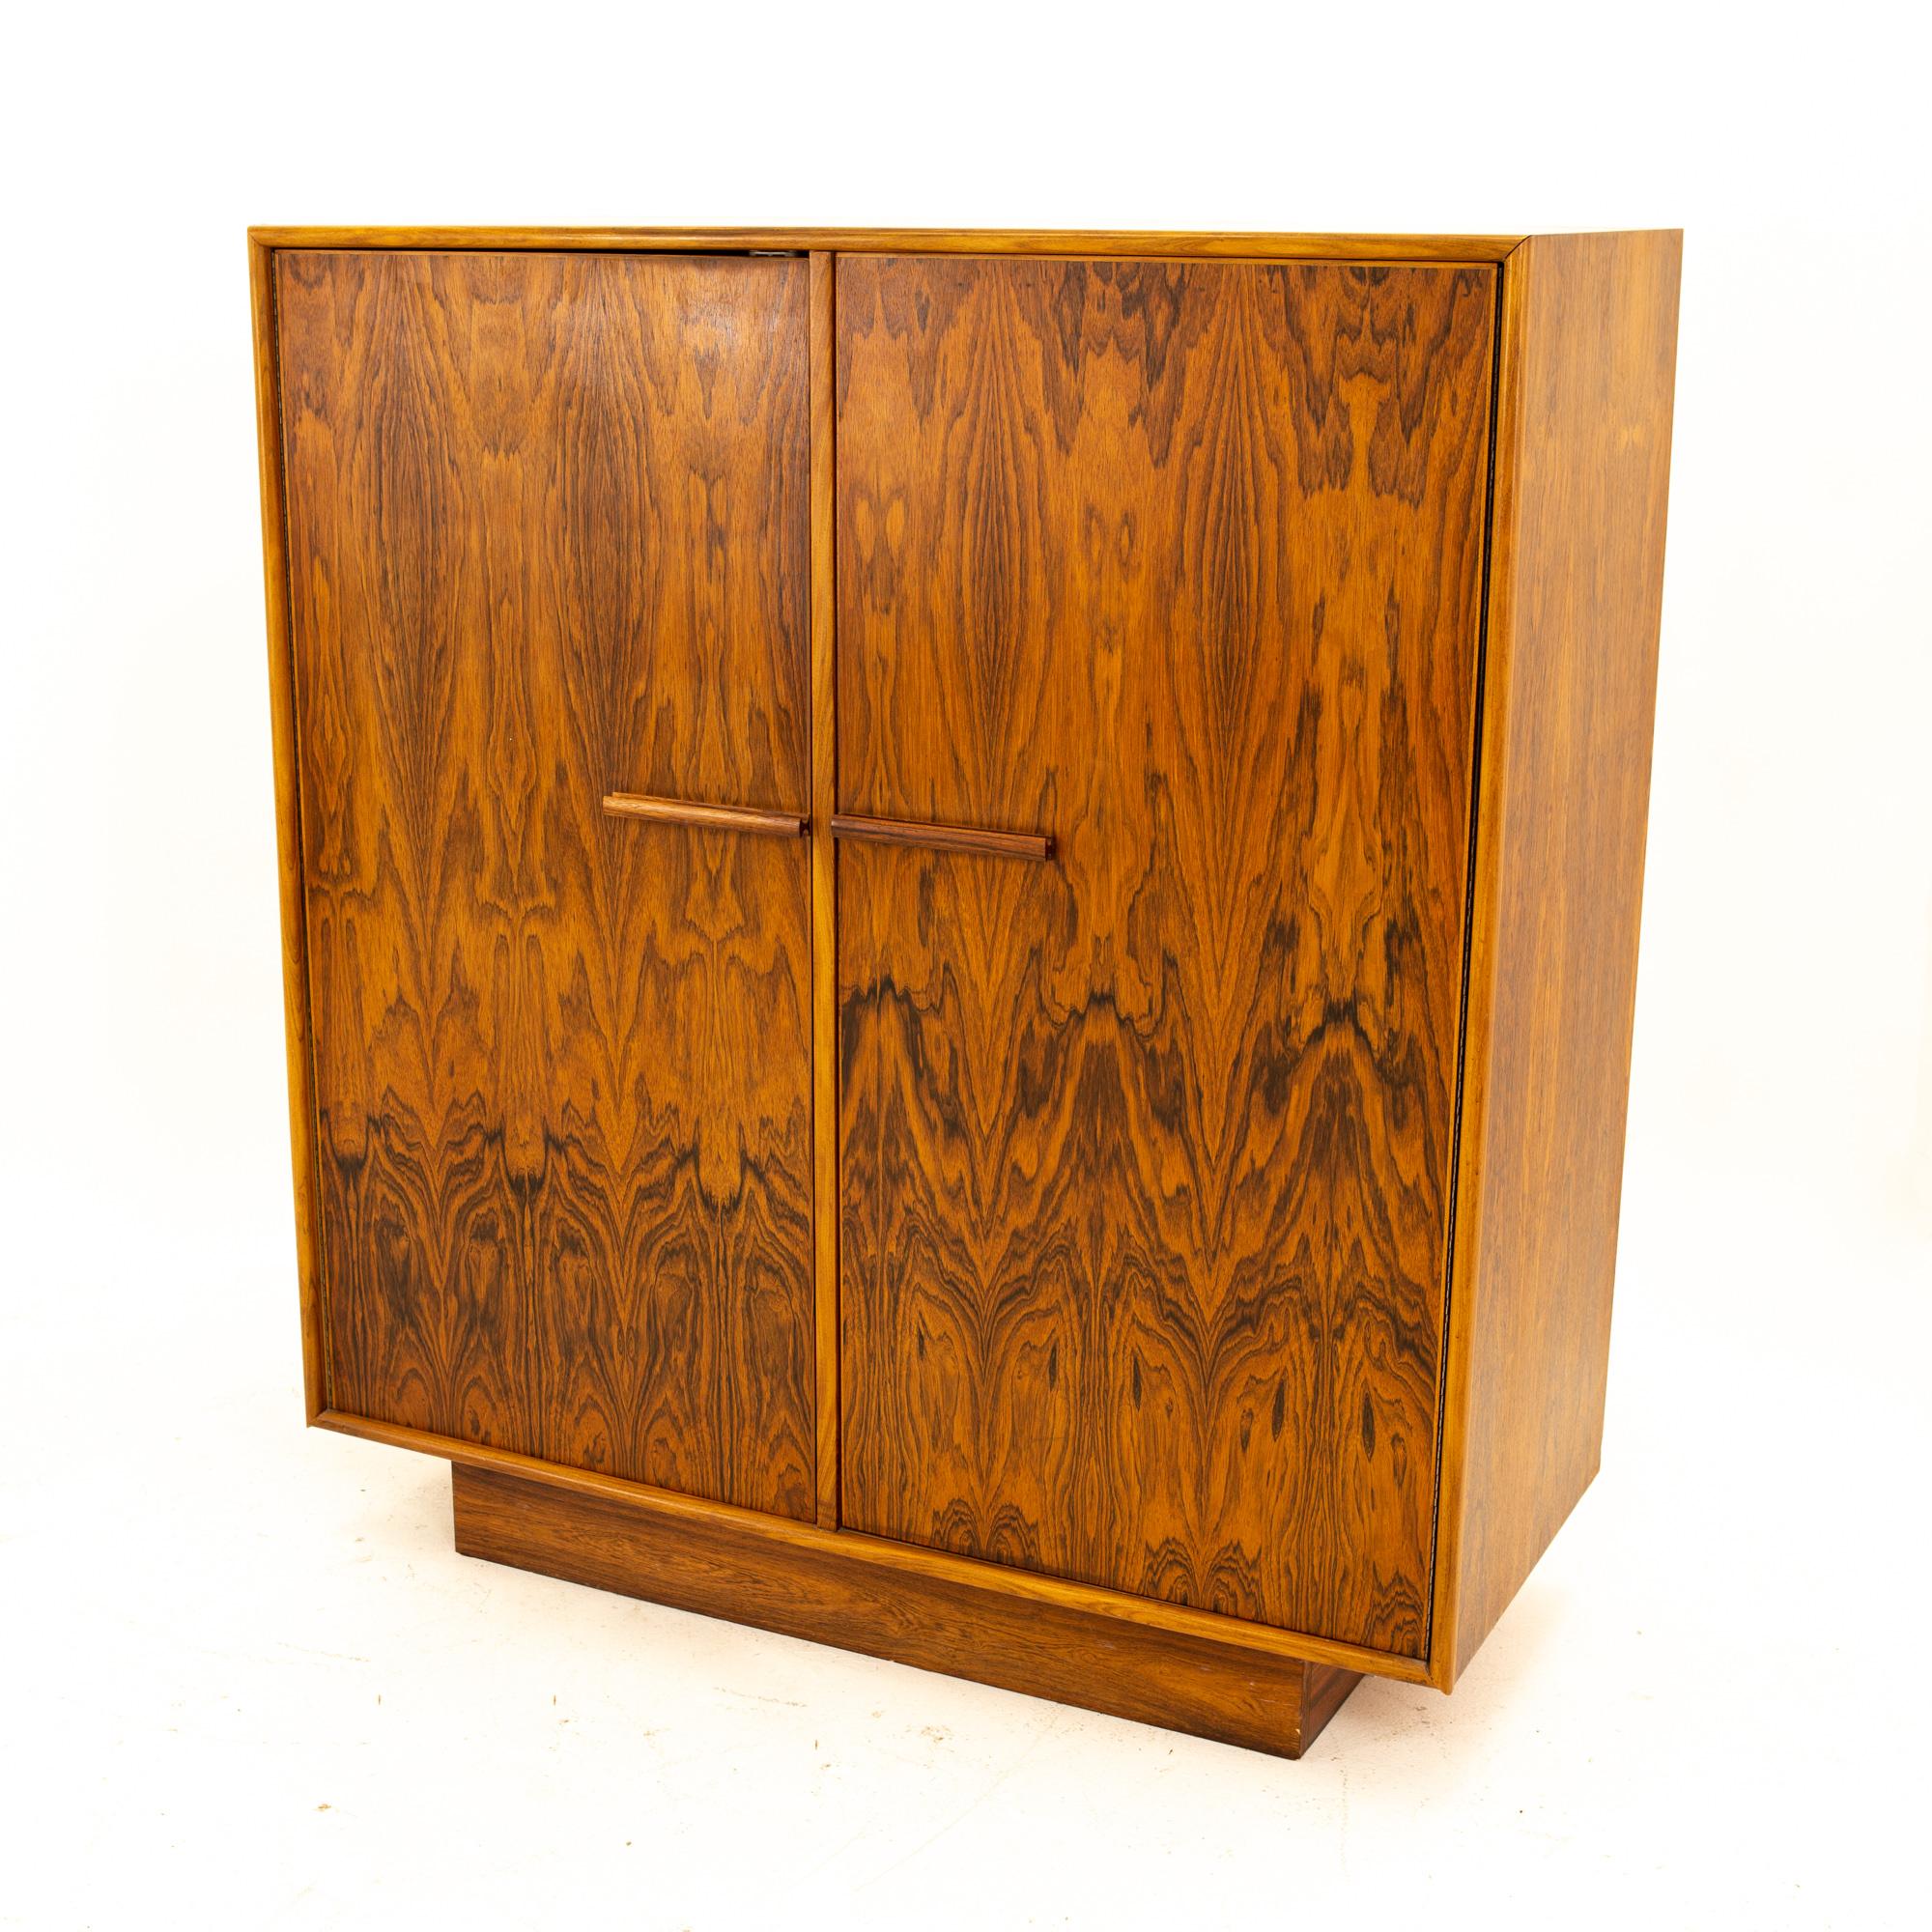 Mid Century rosewood highboy armoire dresser
Dresser measures: 42 wide x 18.5 deep x 47 high

All pieces of furniture can be had in what we call restored vintage condition. That means the piece is restored upon purchase so it’s free of watermarks,